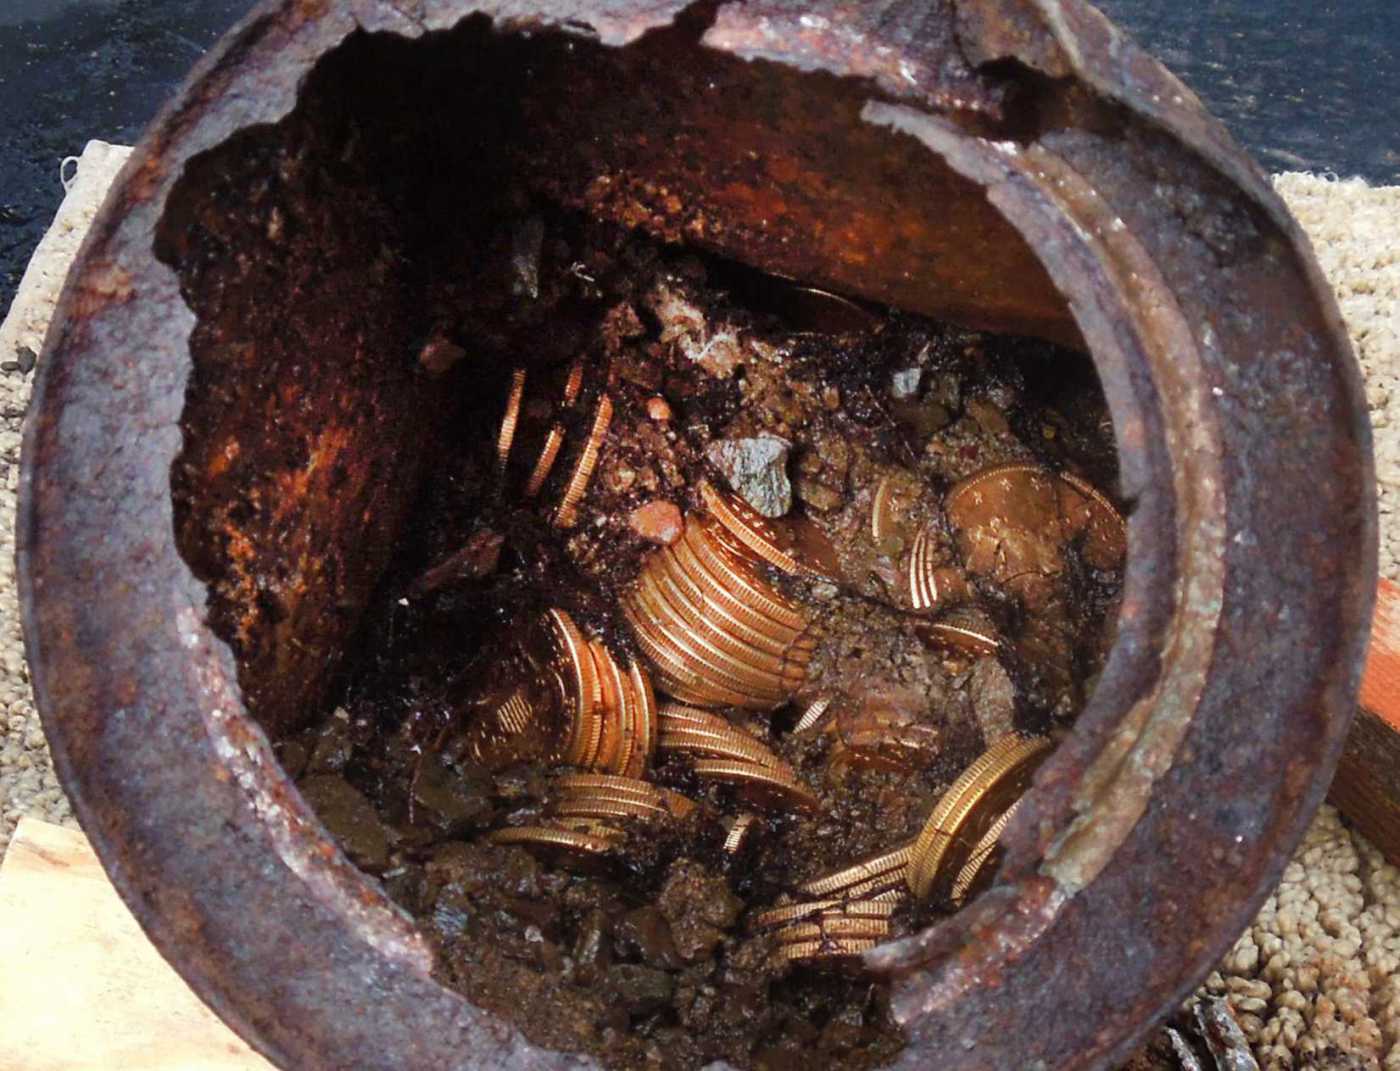 This image provided by the Saddle Ridge Hoard discoverers via Kagin's, Inc., shows one of the six decaying metal canisters filled with 1800s-era U.S. gold coins unearthed in California by two people who want to remain anonymous.